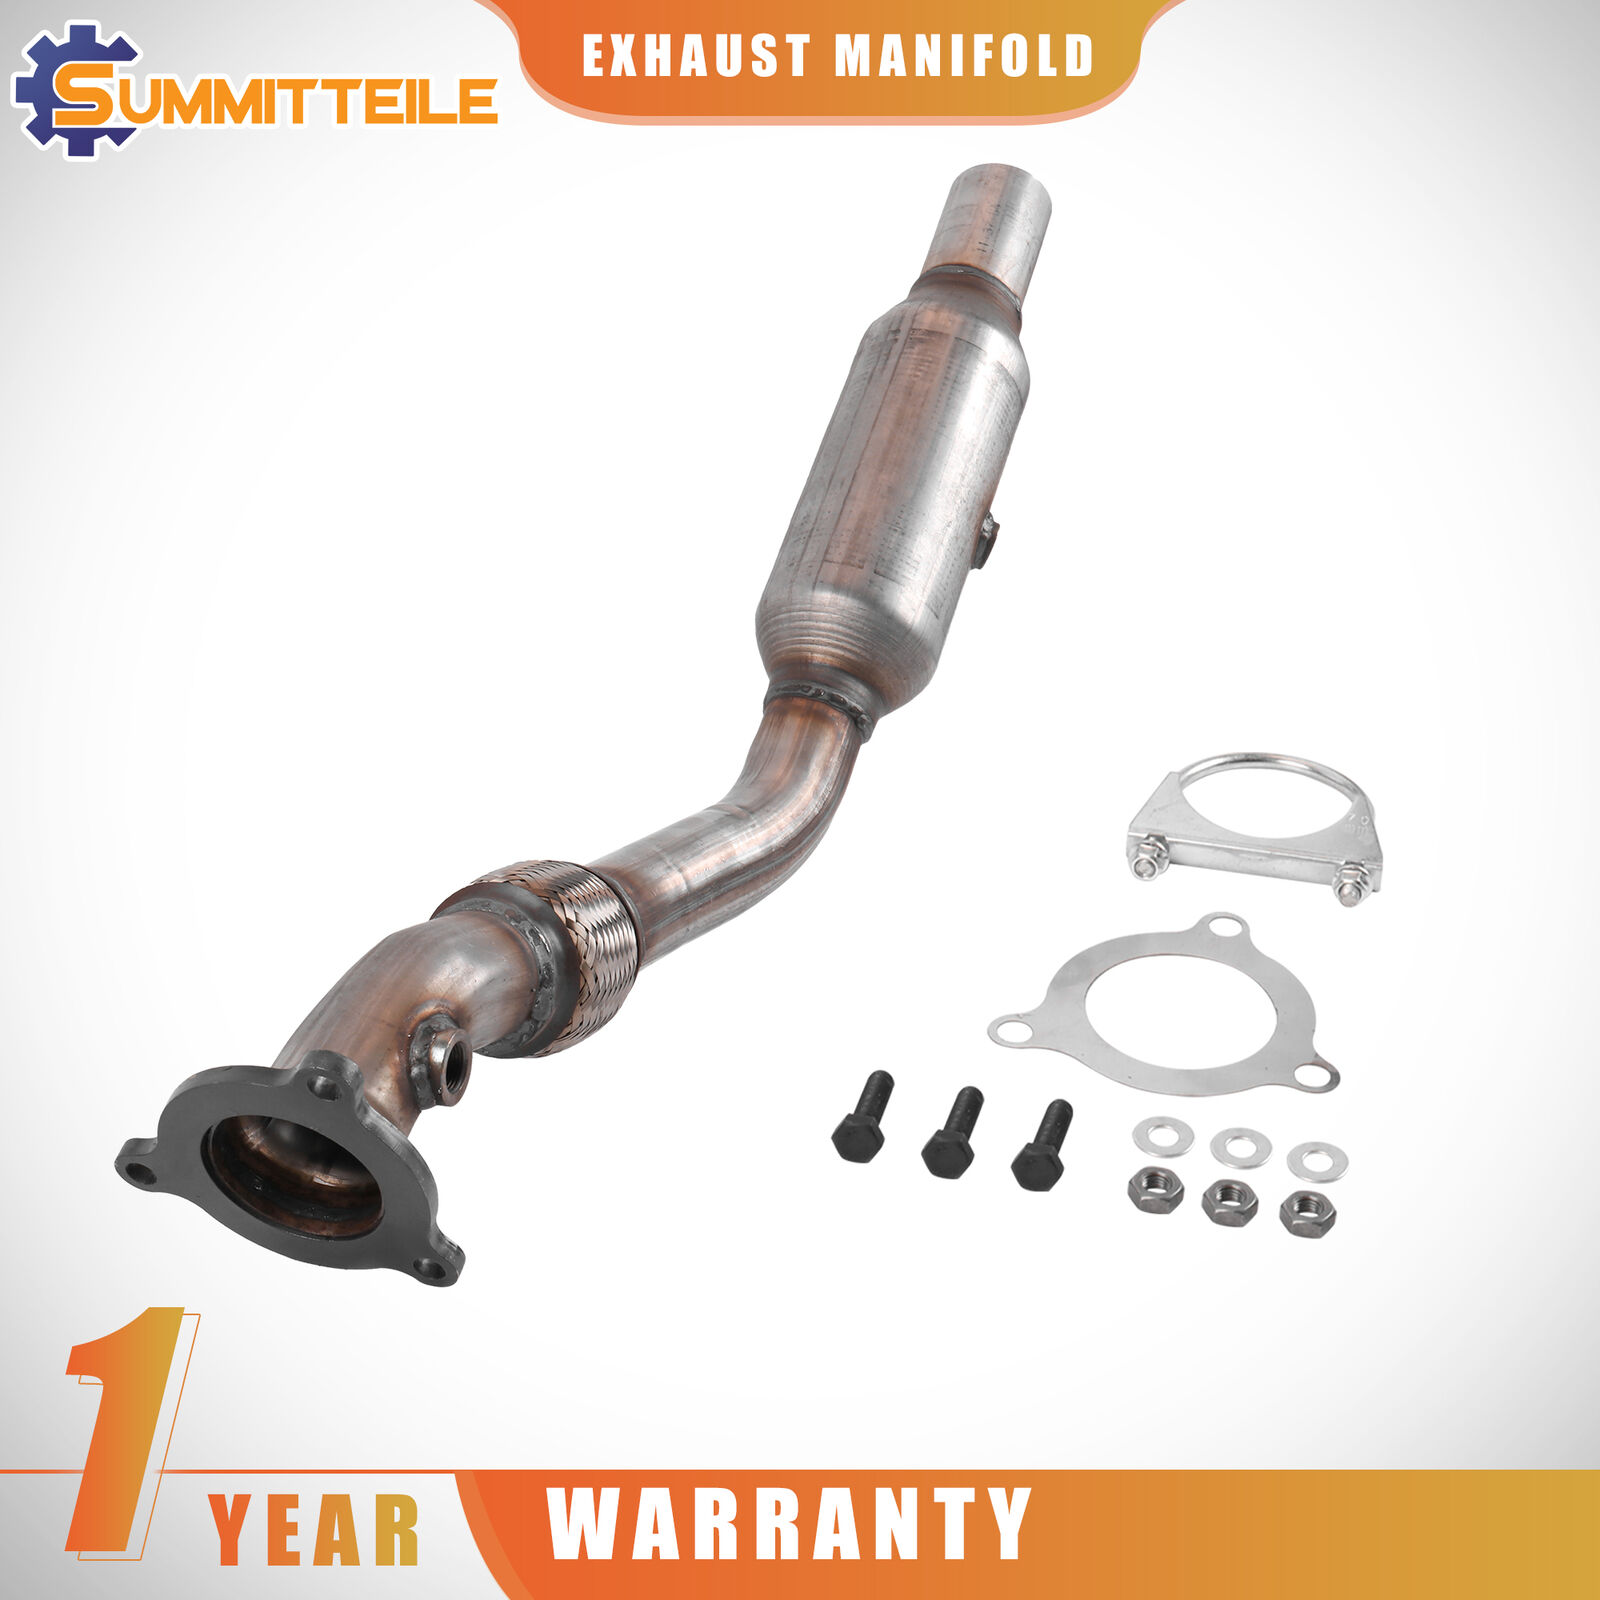 Exhaust Manifold Catalytic Converter With Bolts For 04-06 Chrysler Pacifica 3.5L